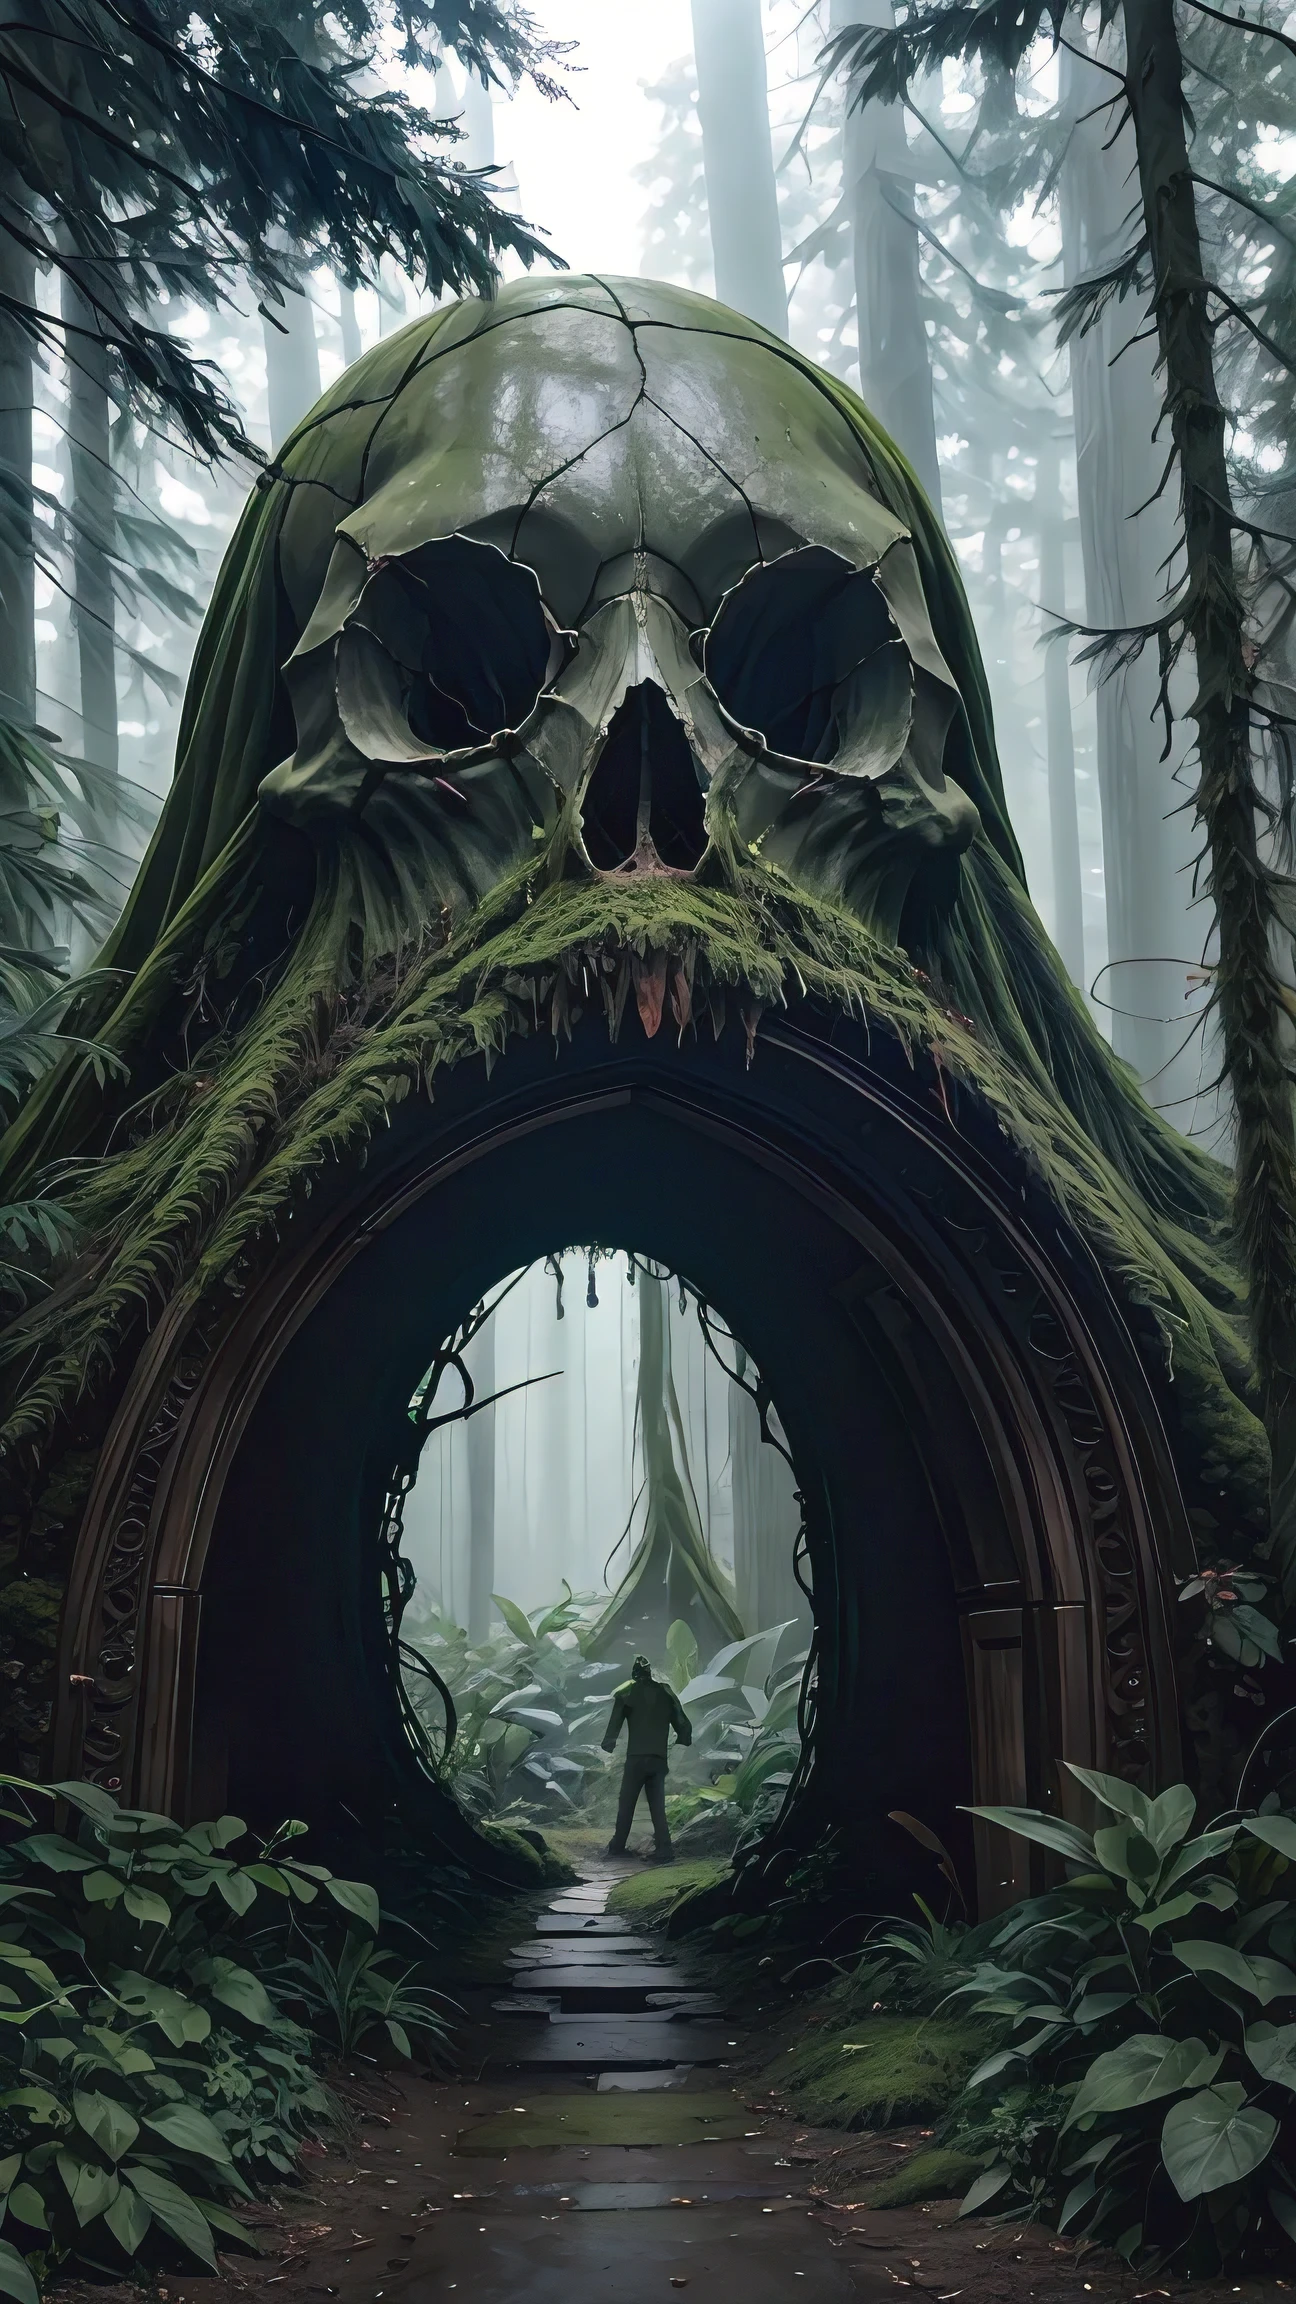 Photo of a portal in shape of a giant moss covered skull in the dark forrest, warner brothers film style, mystic, psychodelic atmosphere, 35mm